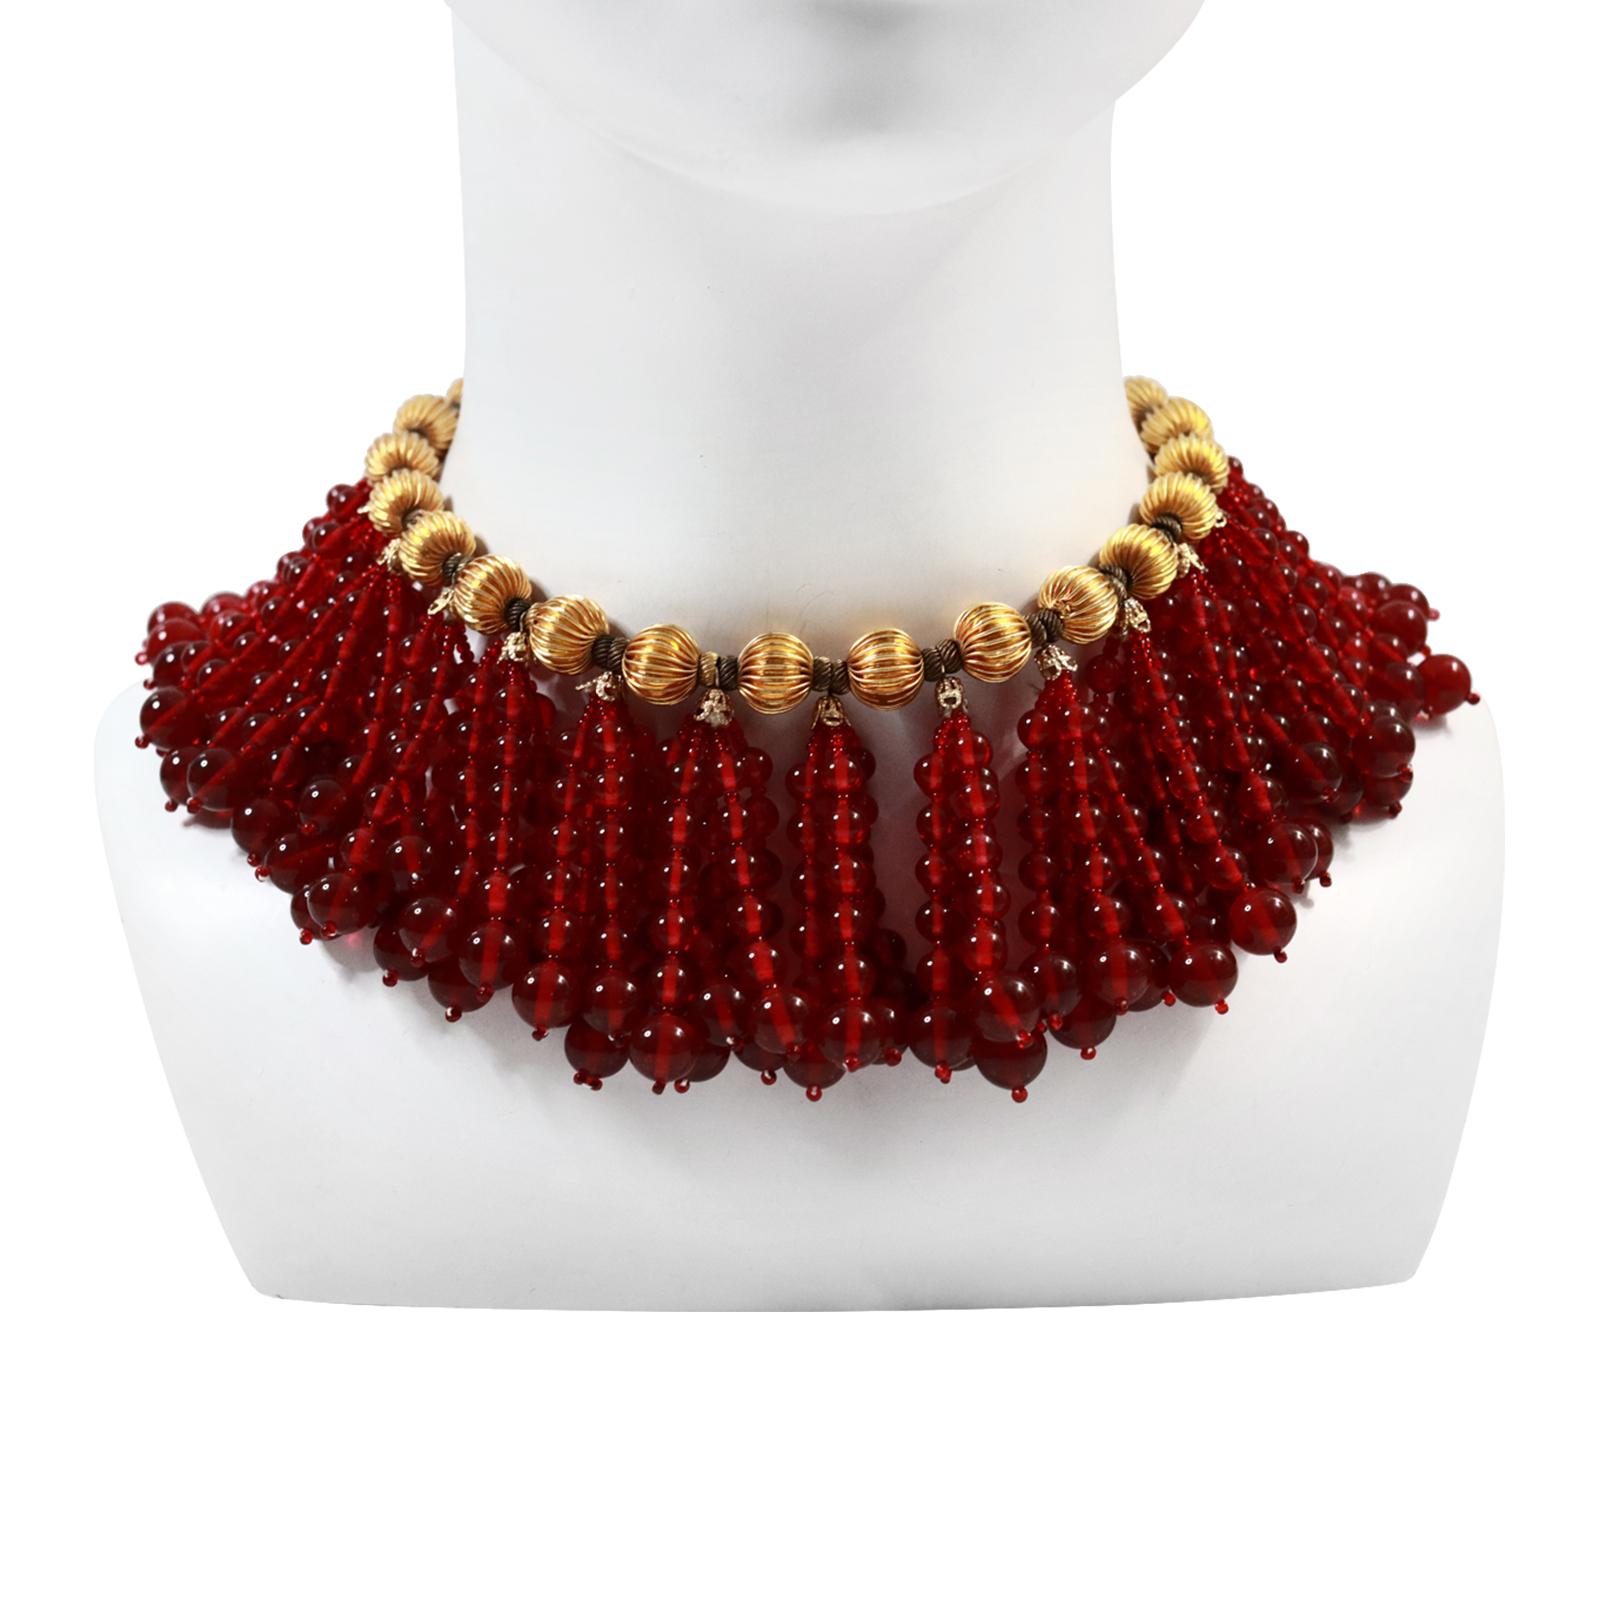 Artist Vintage deLillo Gold Tone with Red Dangling Beads Necklace Circa 1970's For Sale